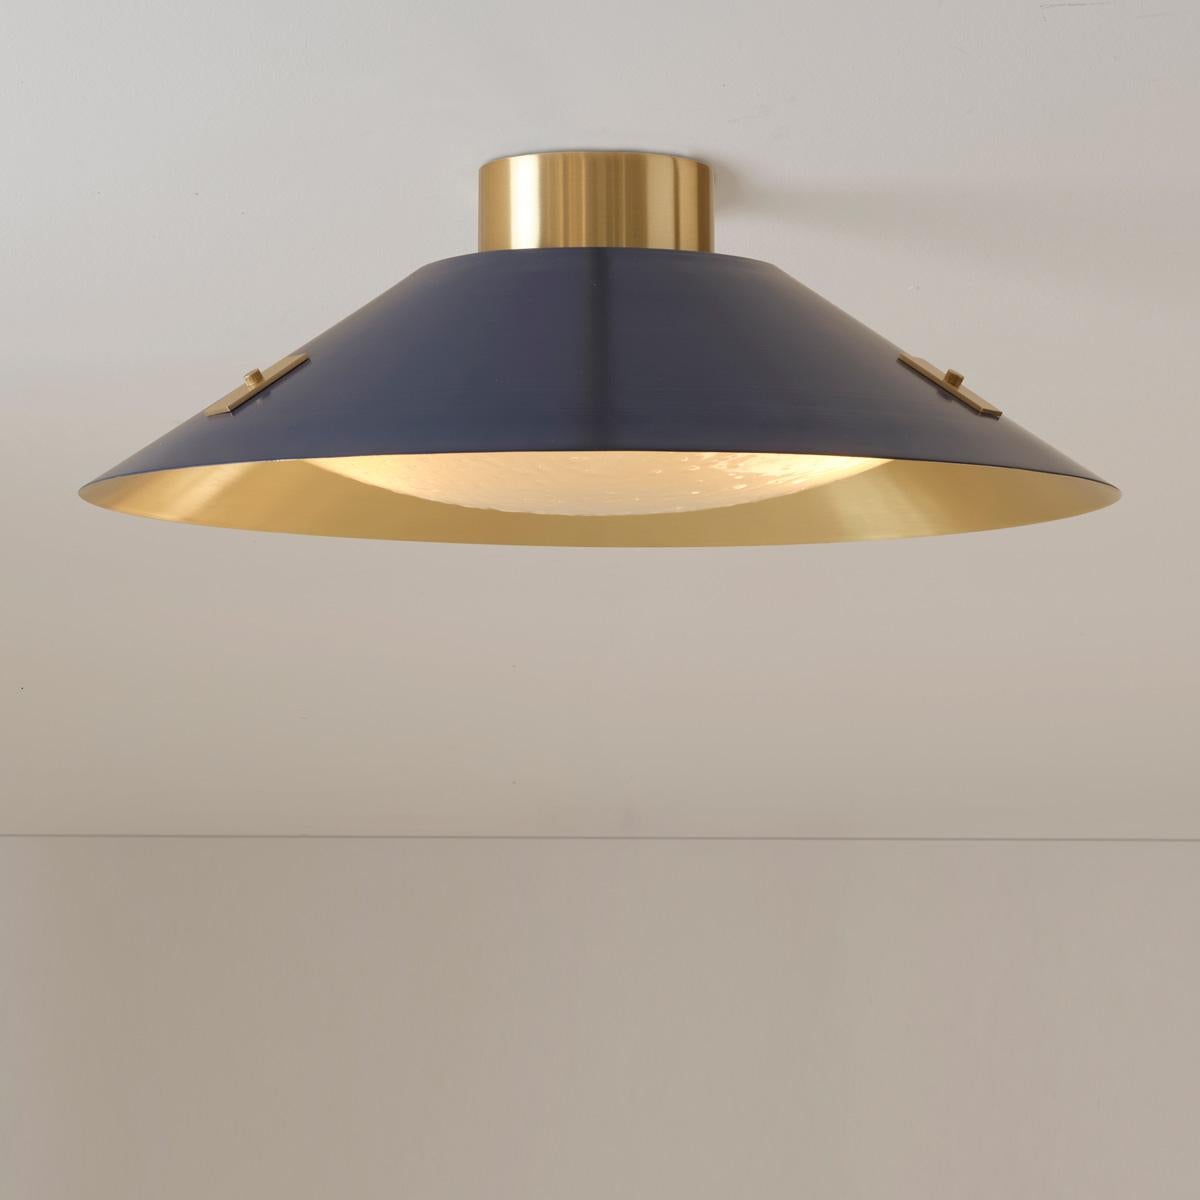 Kono Pendant by Gaspare Asaro. Satin Brass and Stone Grey For Sale 10